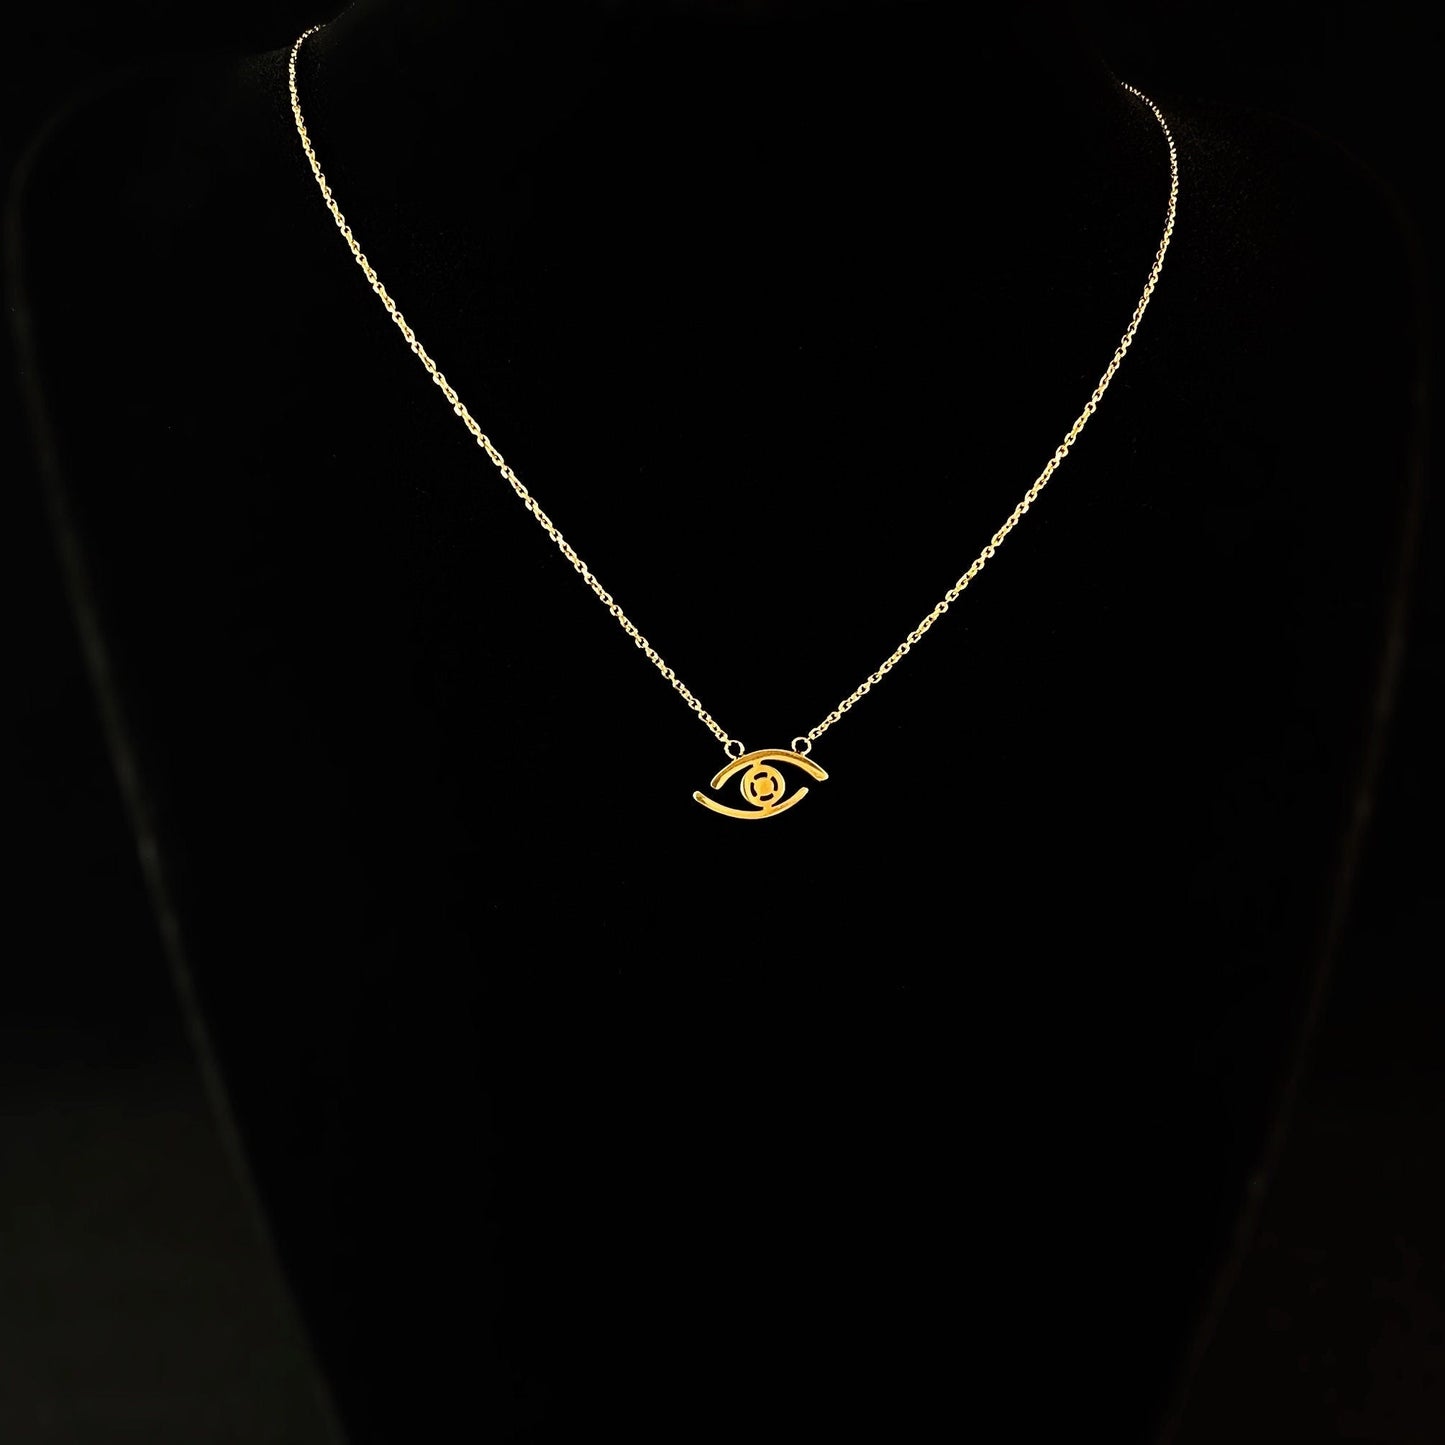 Dainty Gold All Seeing Eye Pendant Necklace - Sabrina